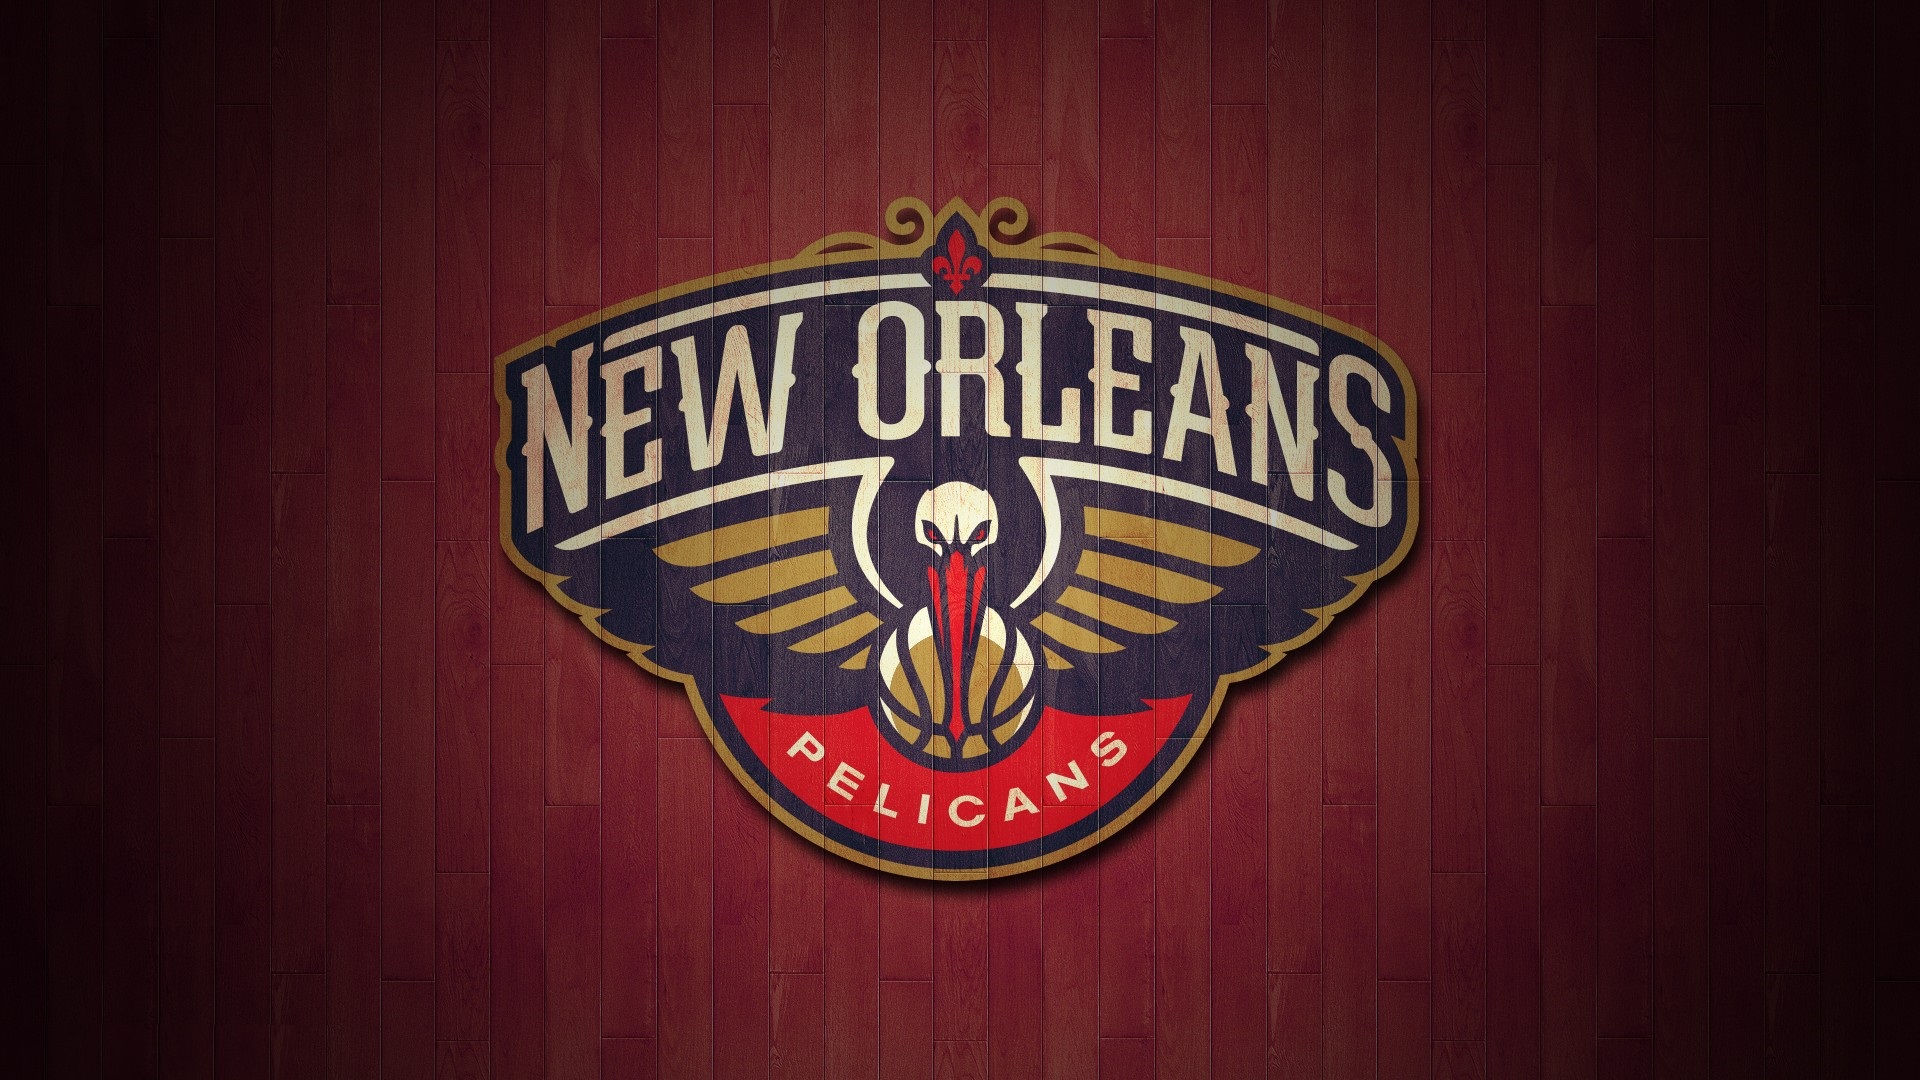 Windows Wallpaper New Orleans Pelicans With high-resolution 1920X1080 pixel. You can use this wallpaper for your Desktop Computer Backgrounds, Windows or Mac Screensavers, iPhone Lock screen, Tablet or Android and another Mobile Phone device